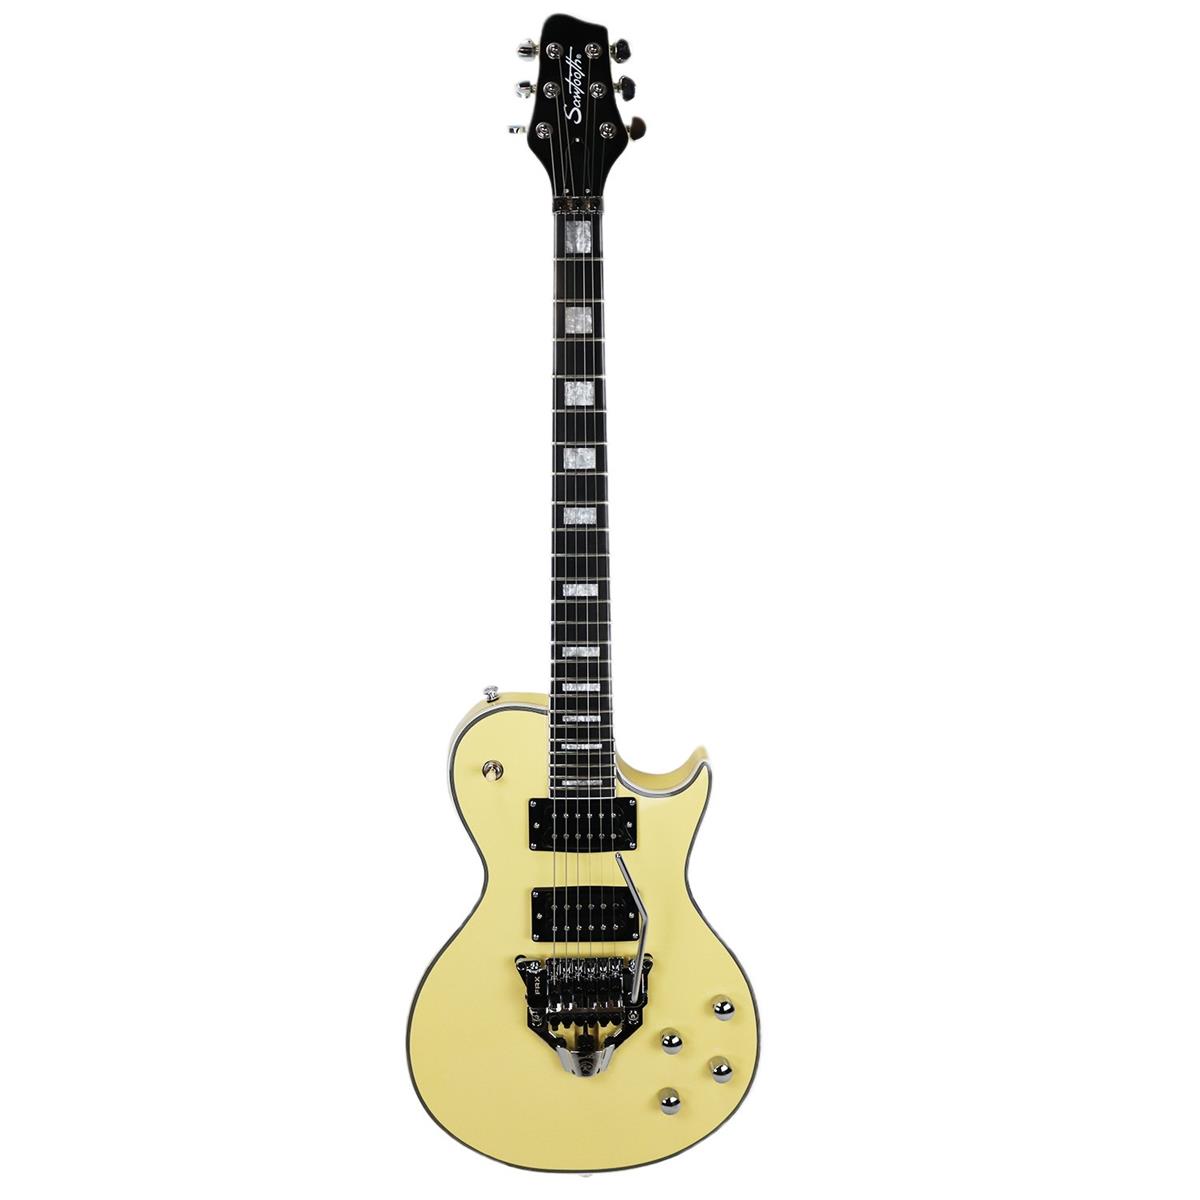 Sawtooth Heritage Series 24 Fret Guitar with Floyd Rose FRX System,Antique White -  ST-H70-FRX24-ATQWH